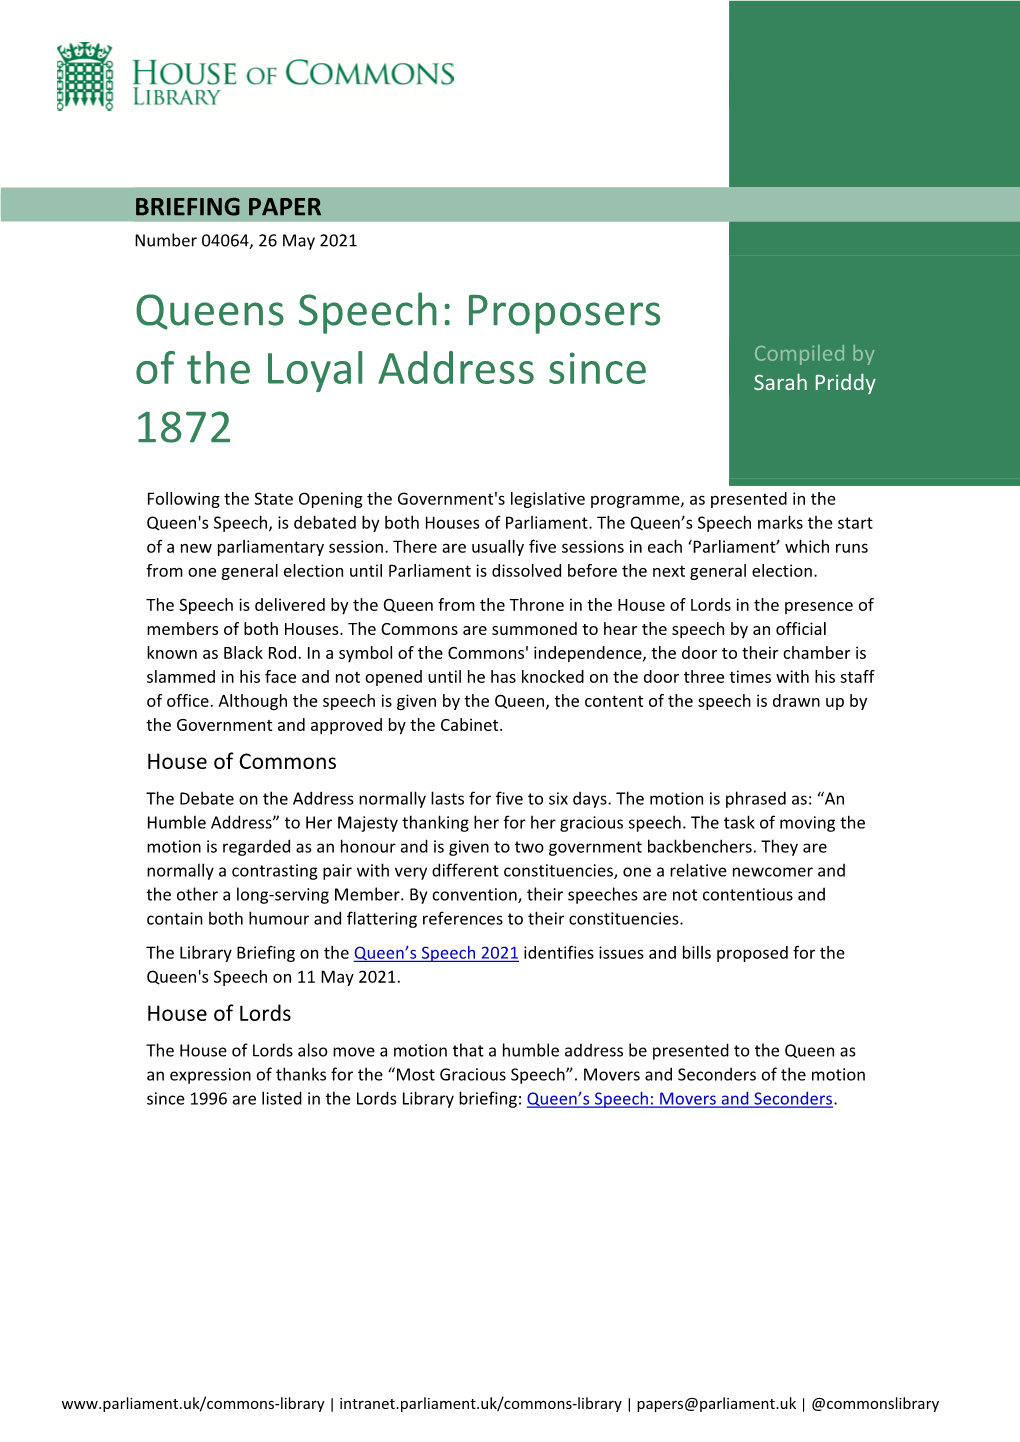 Proposers of the Loyal Address Since 1900